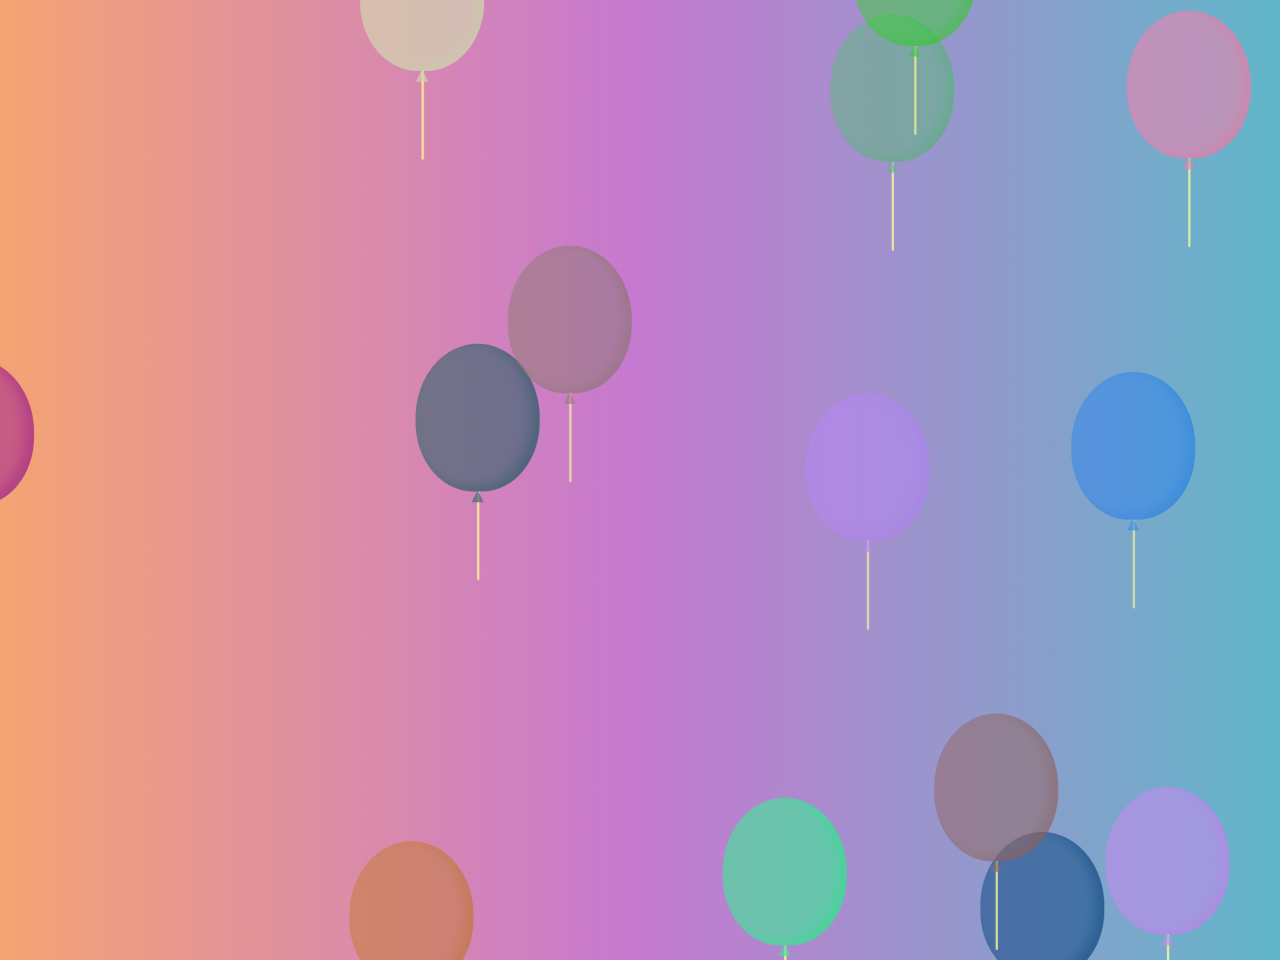 Floating Balloons HTML Code